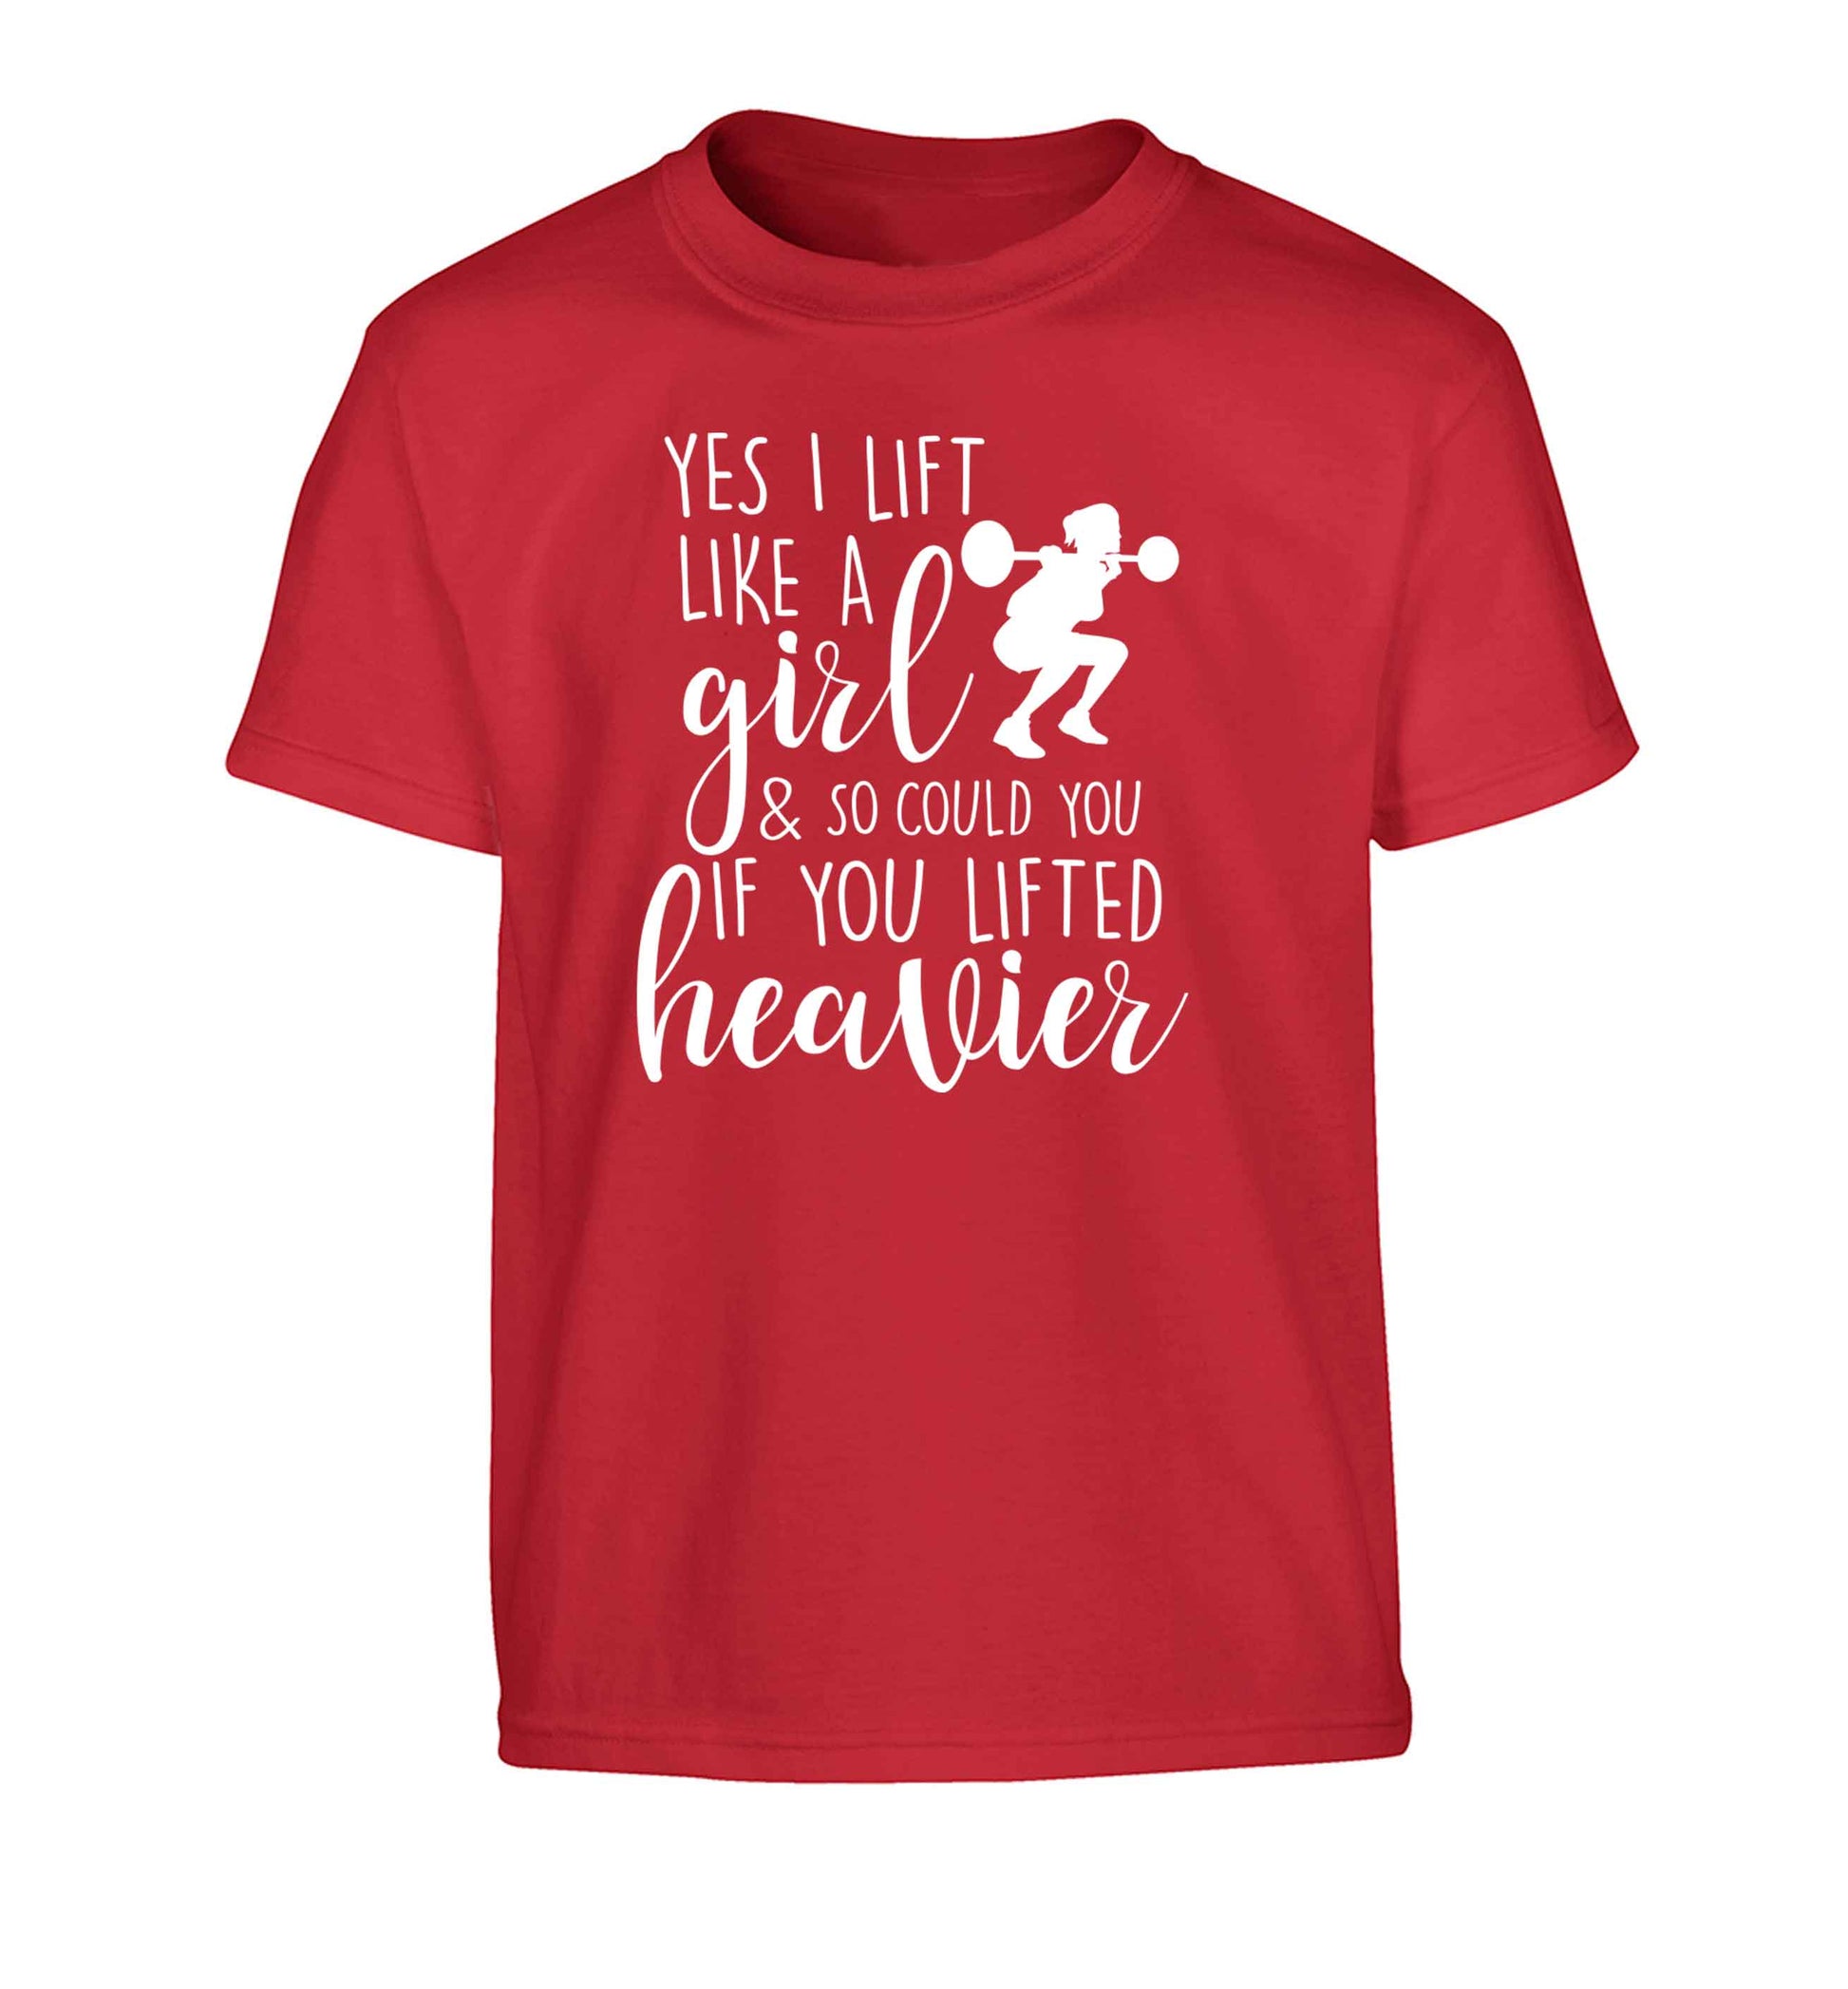 Yes I lift like a girl and so could you if you lifted heavier Children's red Tshirt 12-13 Years